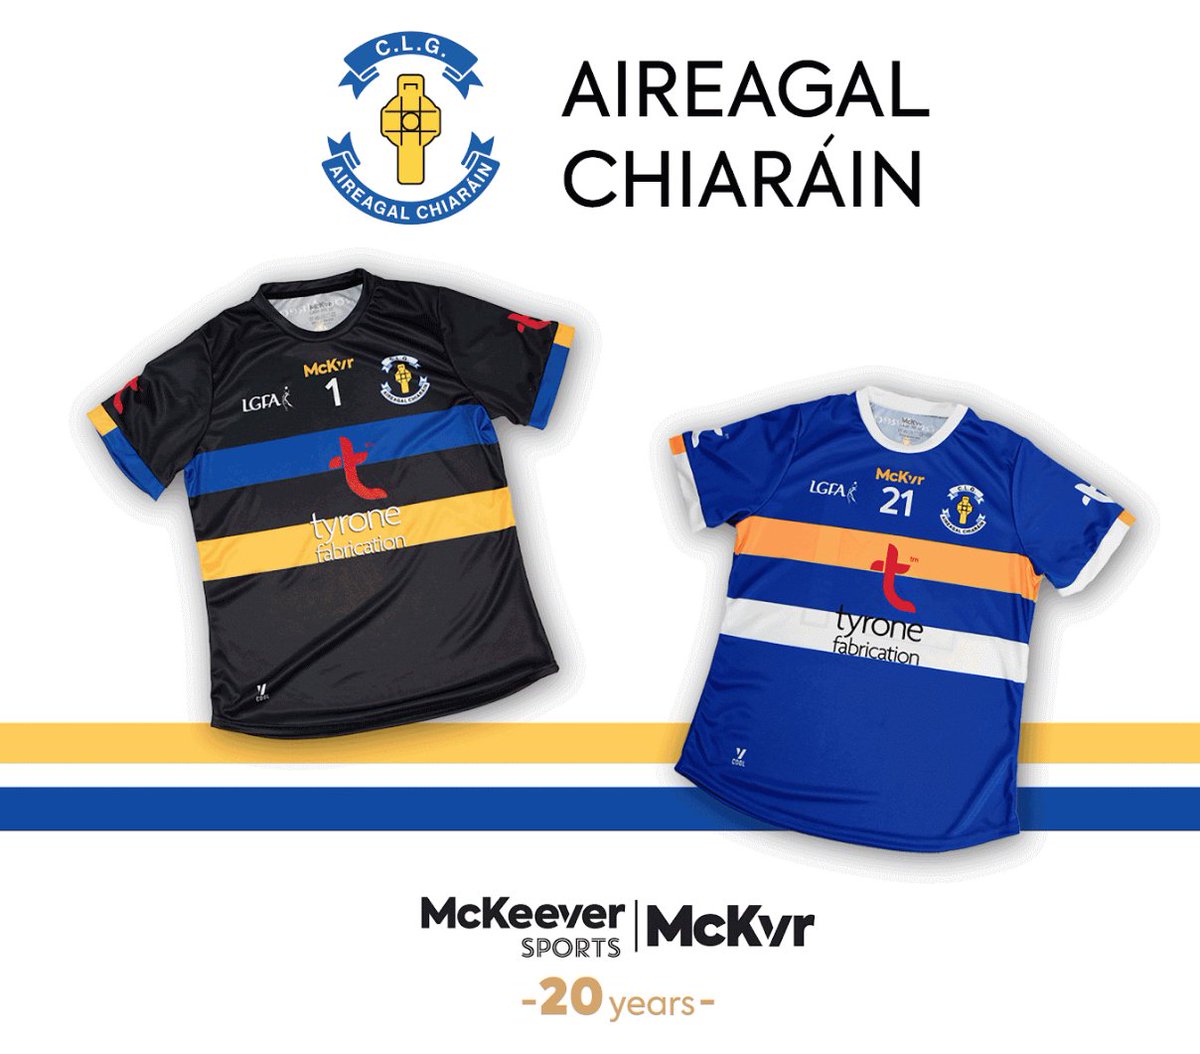 🌟 New season, new jerseys! 🌟 Check out these brand new LGFA @ErrigalCiaran1 jerseys - fresh off the press and ready for action. The ladies will be out on the field in style with these vibrant colours and sleek design 🤩